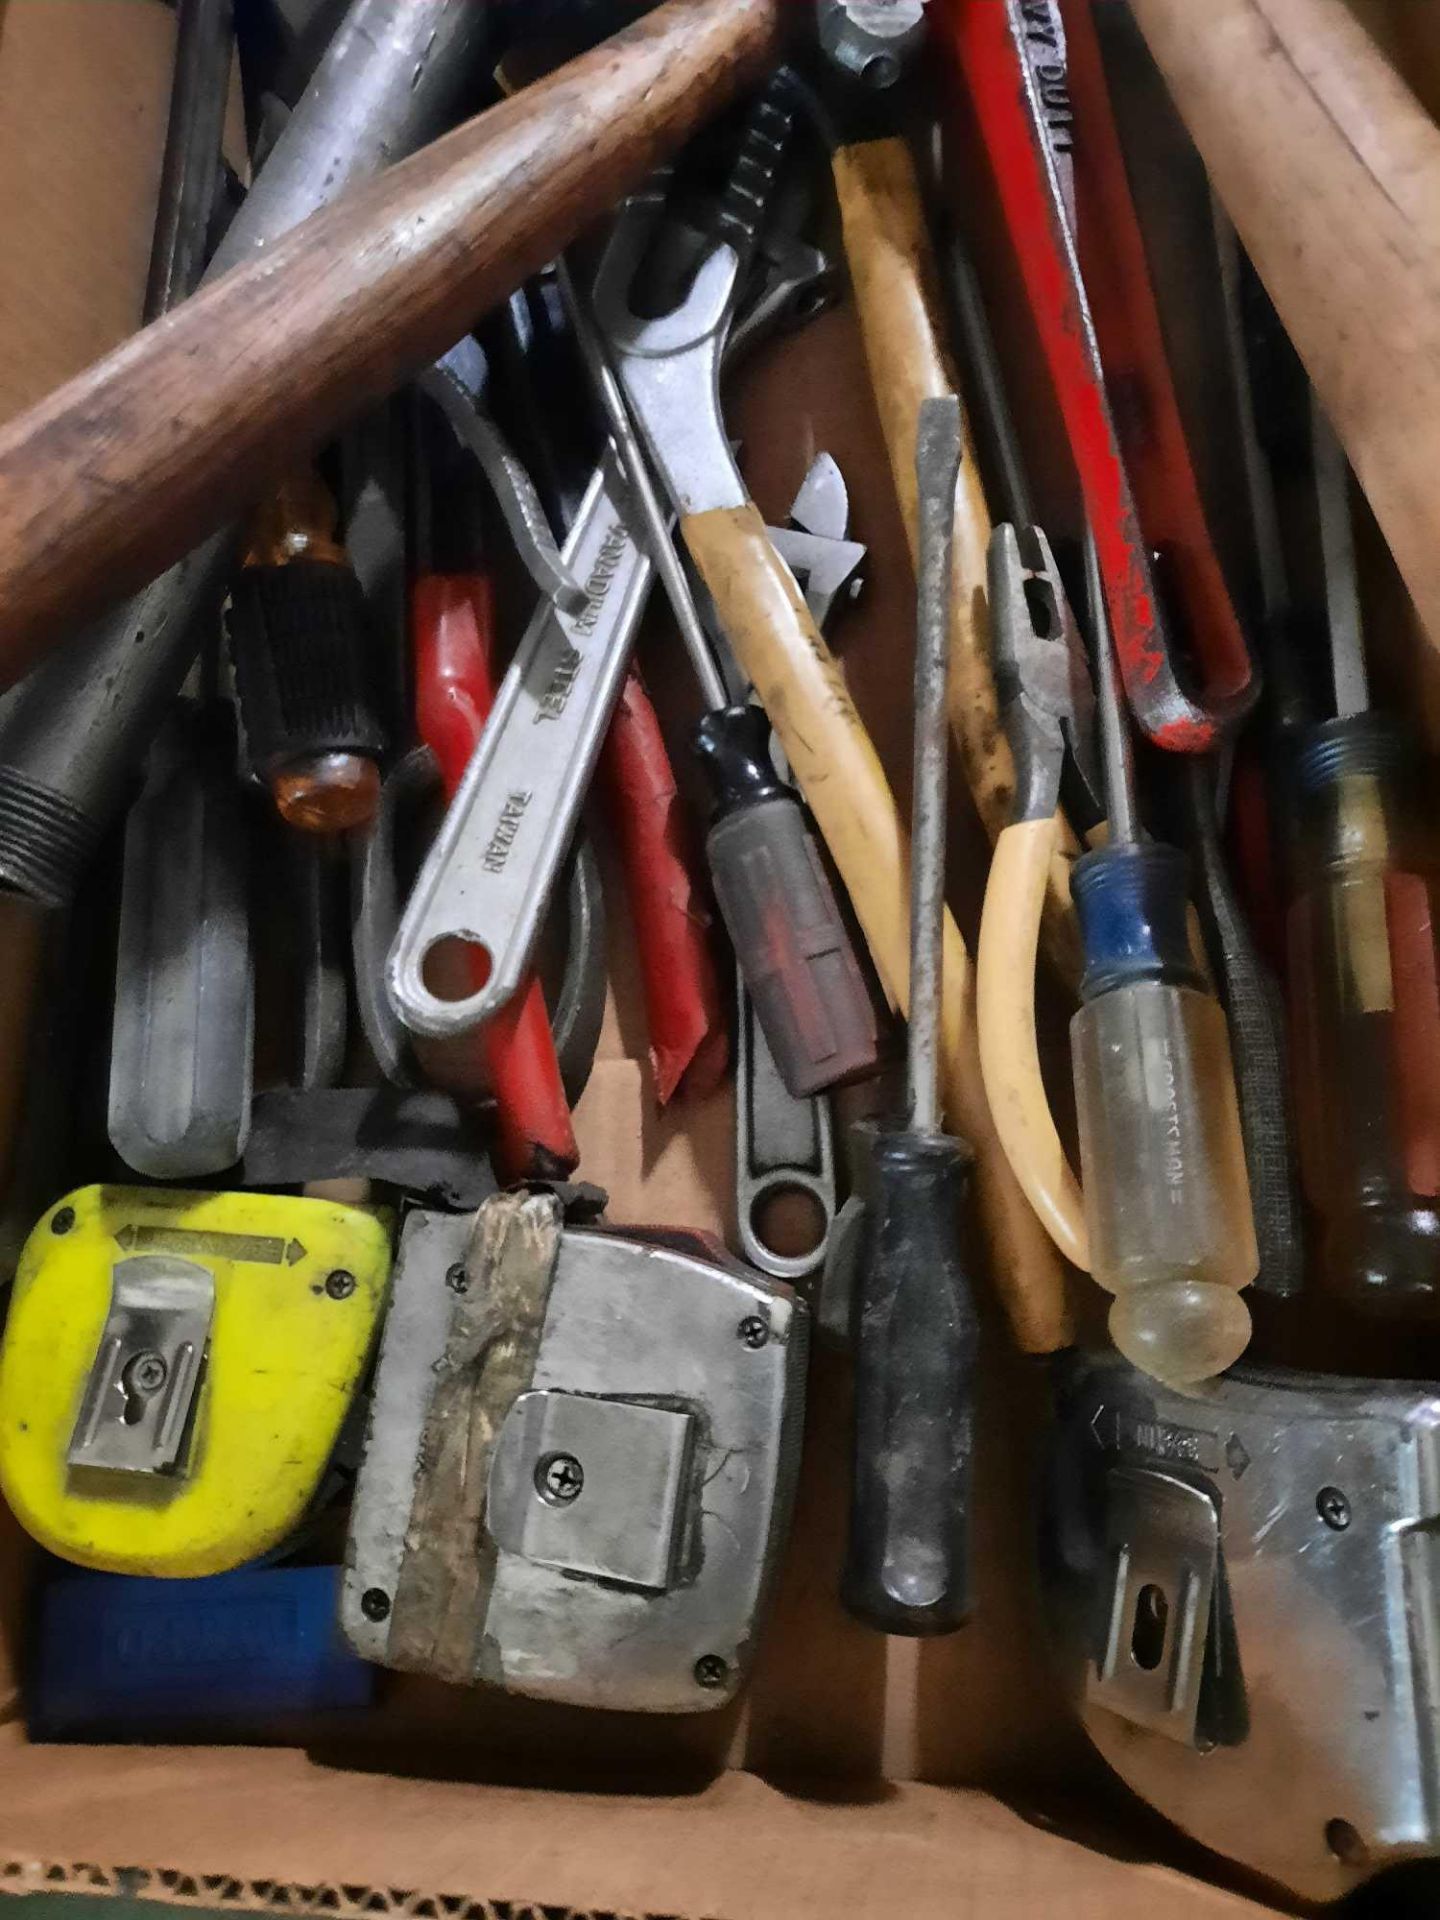 Assorted tools, hammers, wrenches, screwdrivers, cutters, measuring